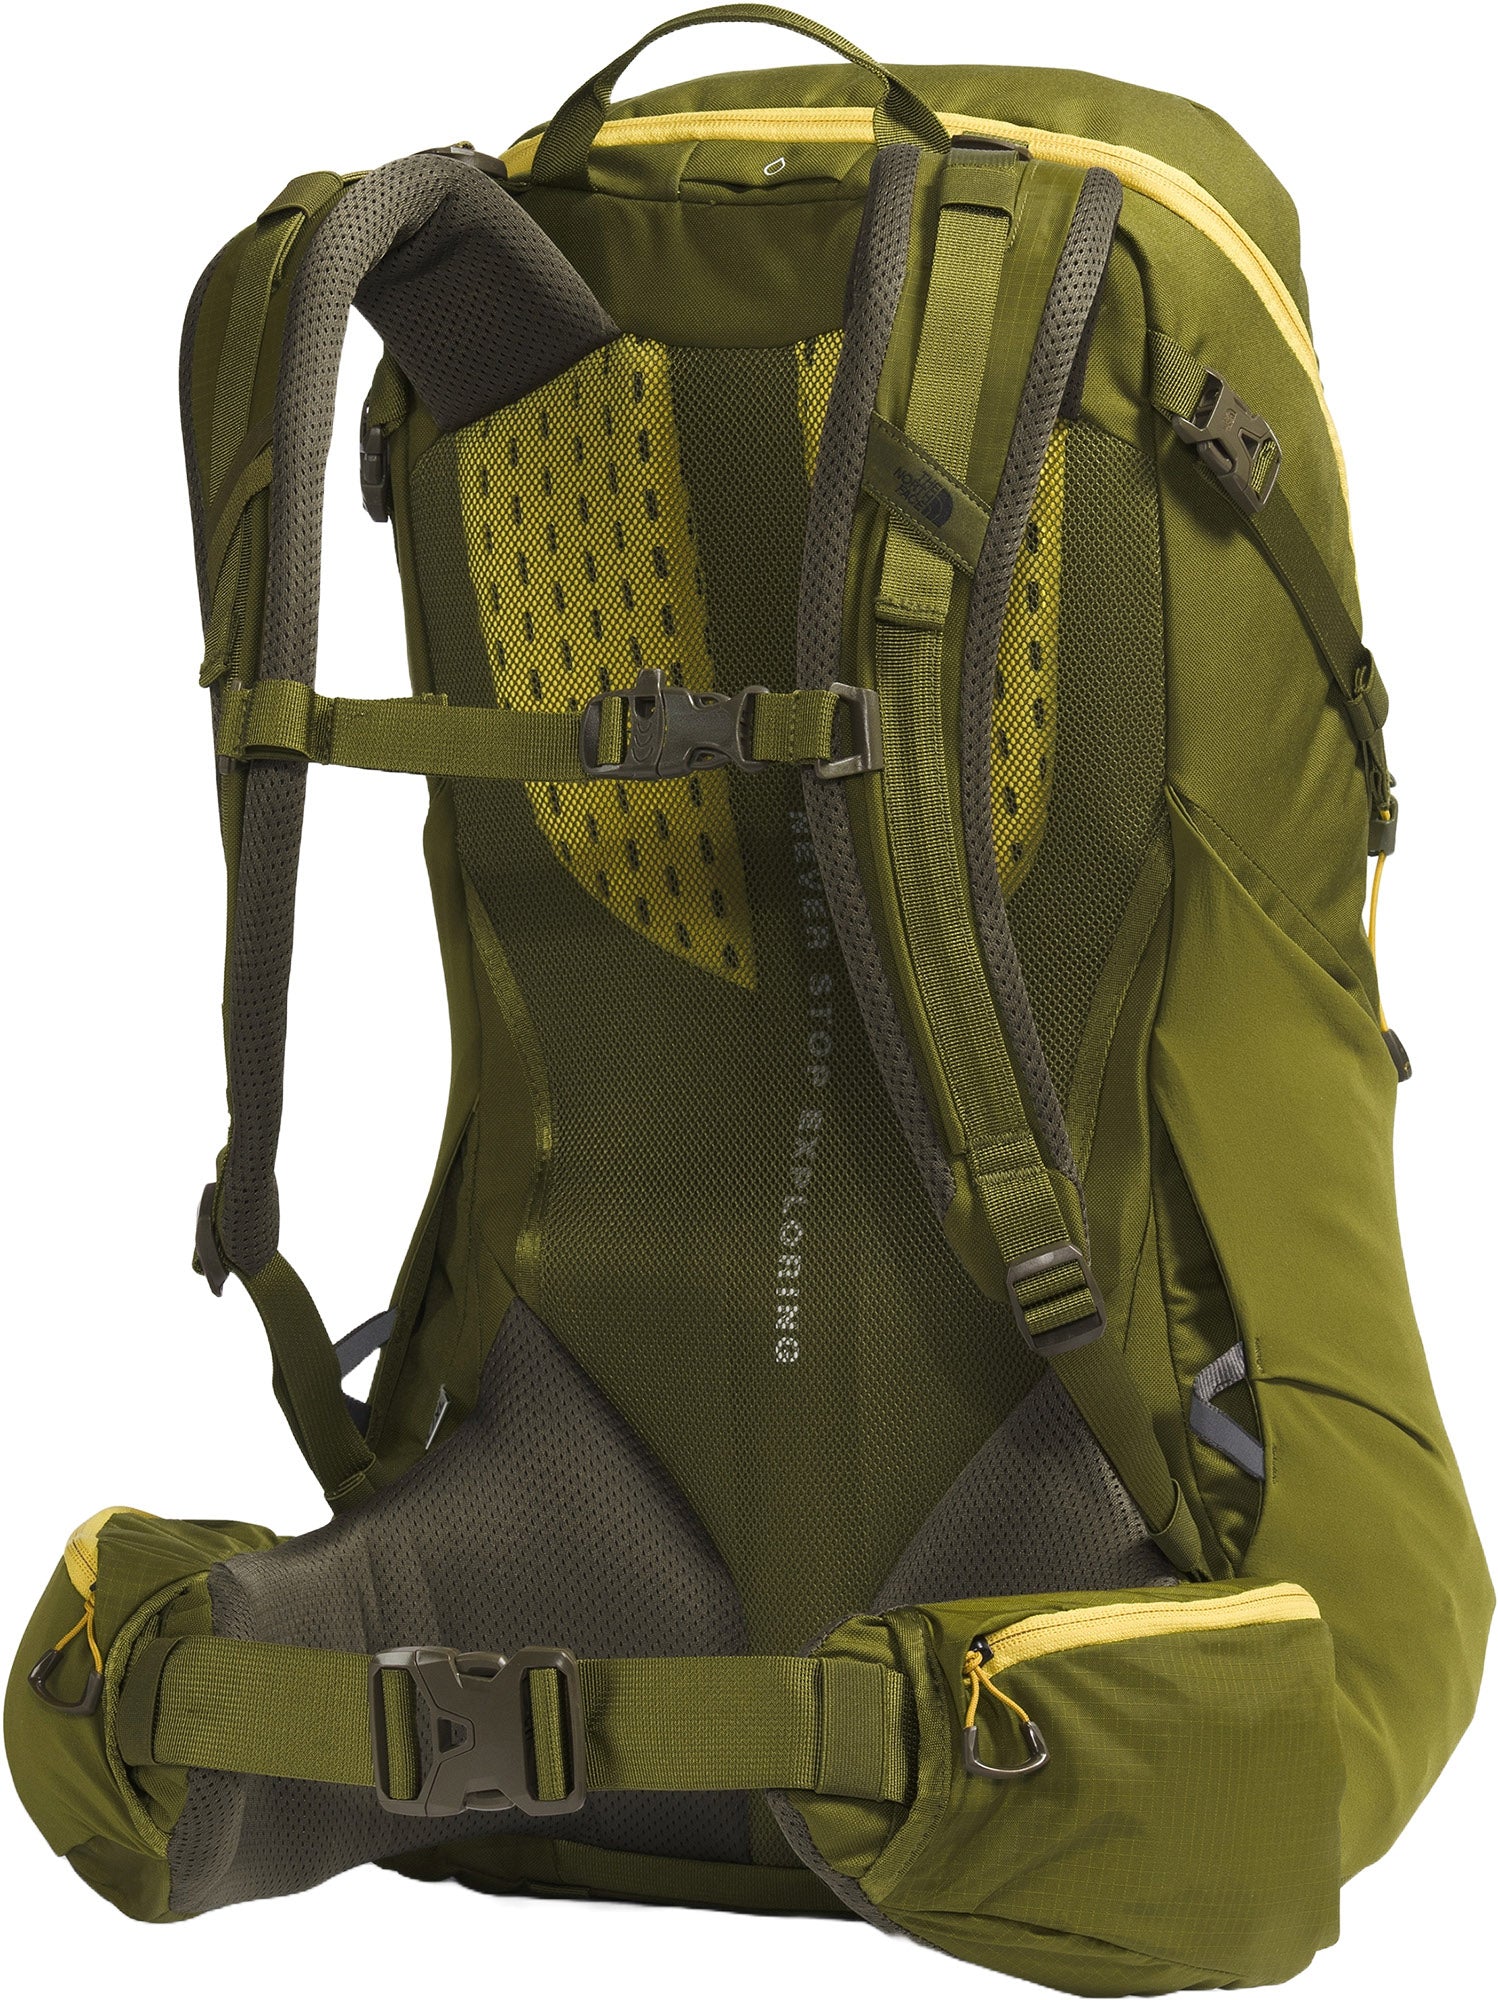 The North Face Terra Backpack 40L | Altitude Sports